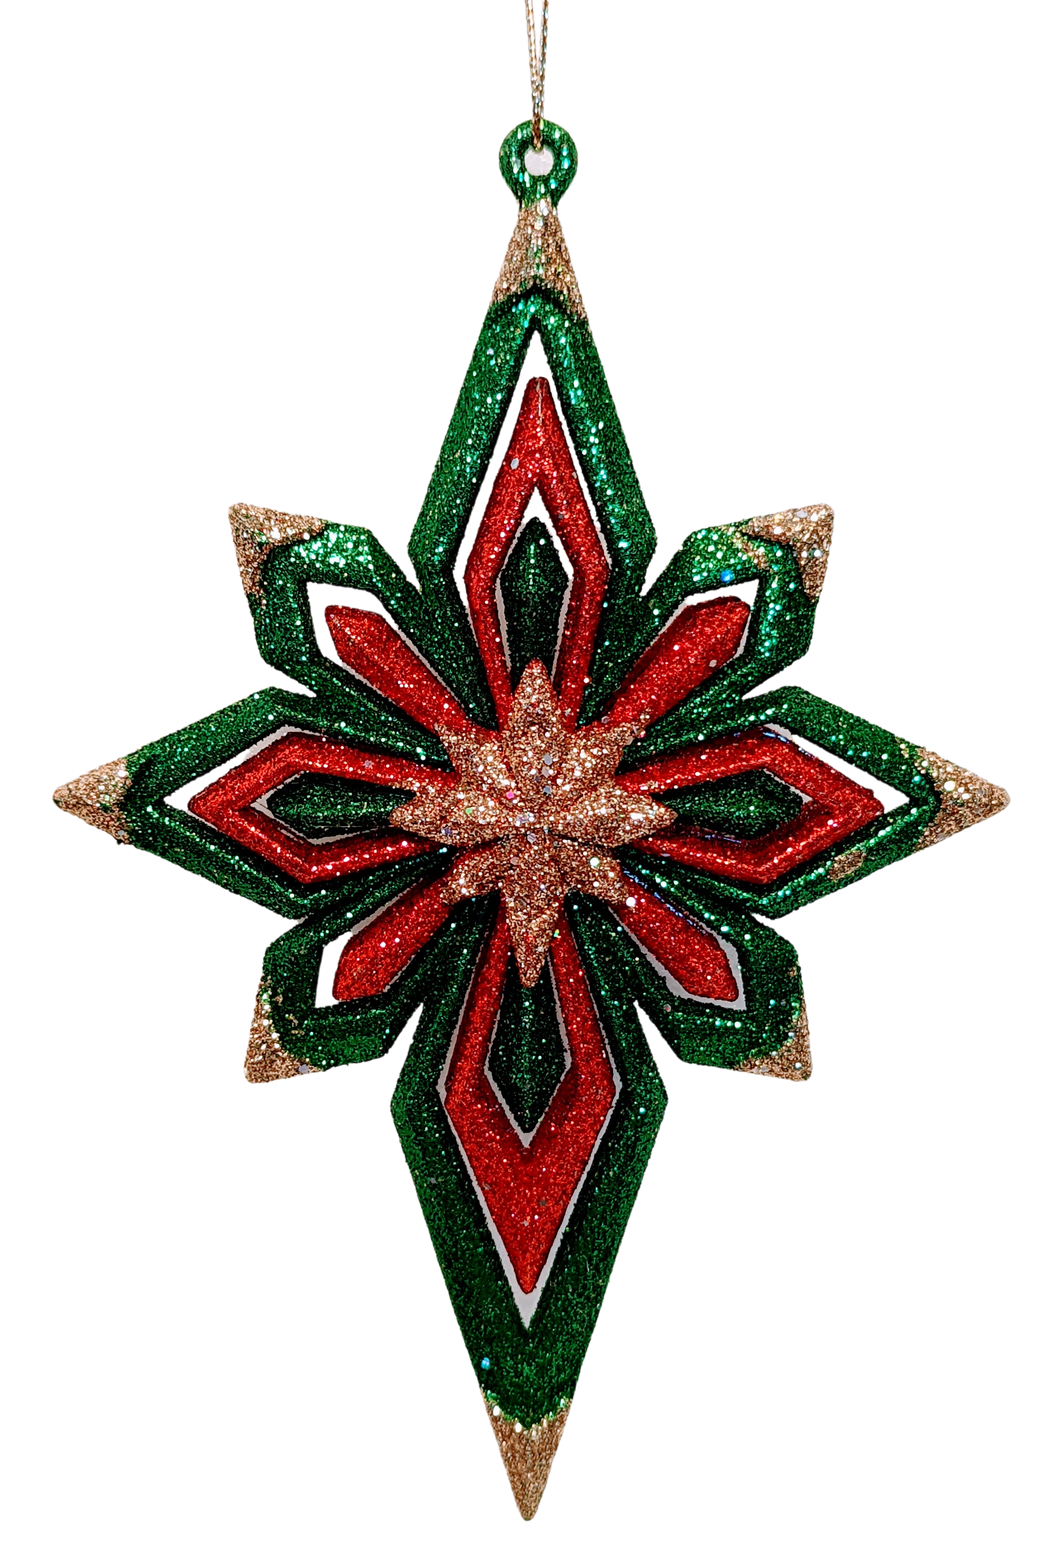 Red, Green and Gold Glittered Bethlehem Star Ornament Assortment see